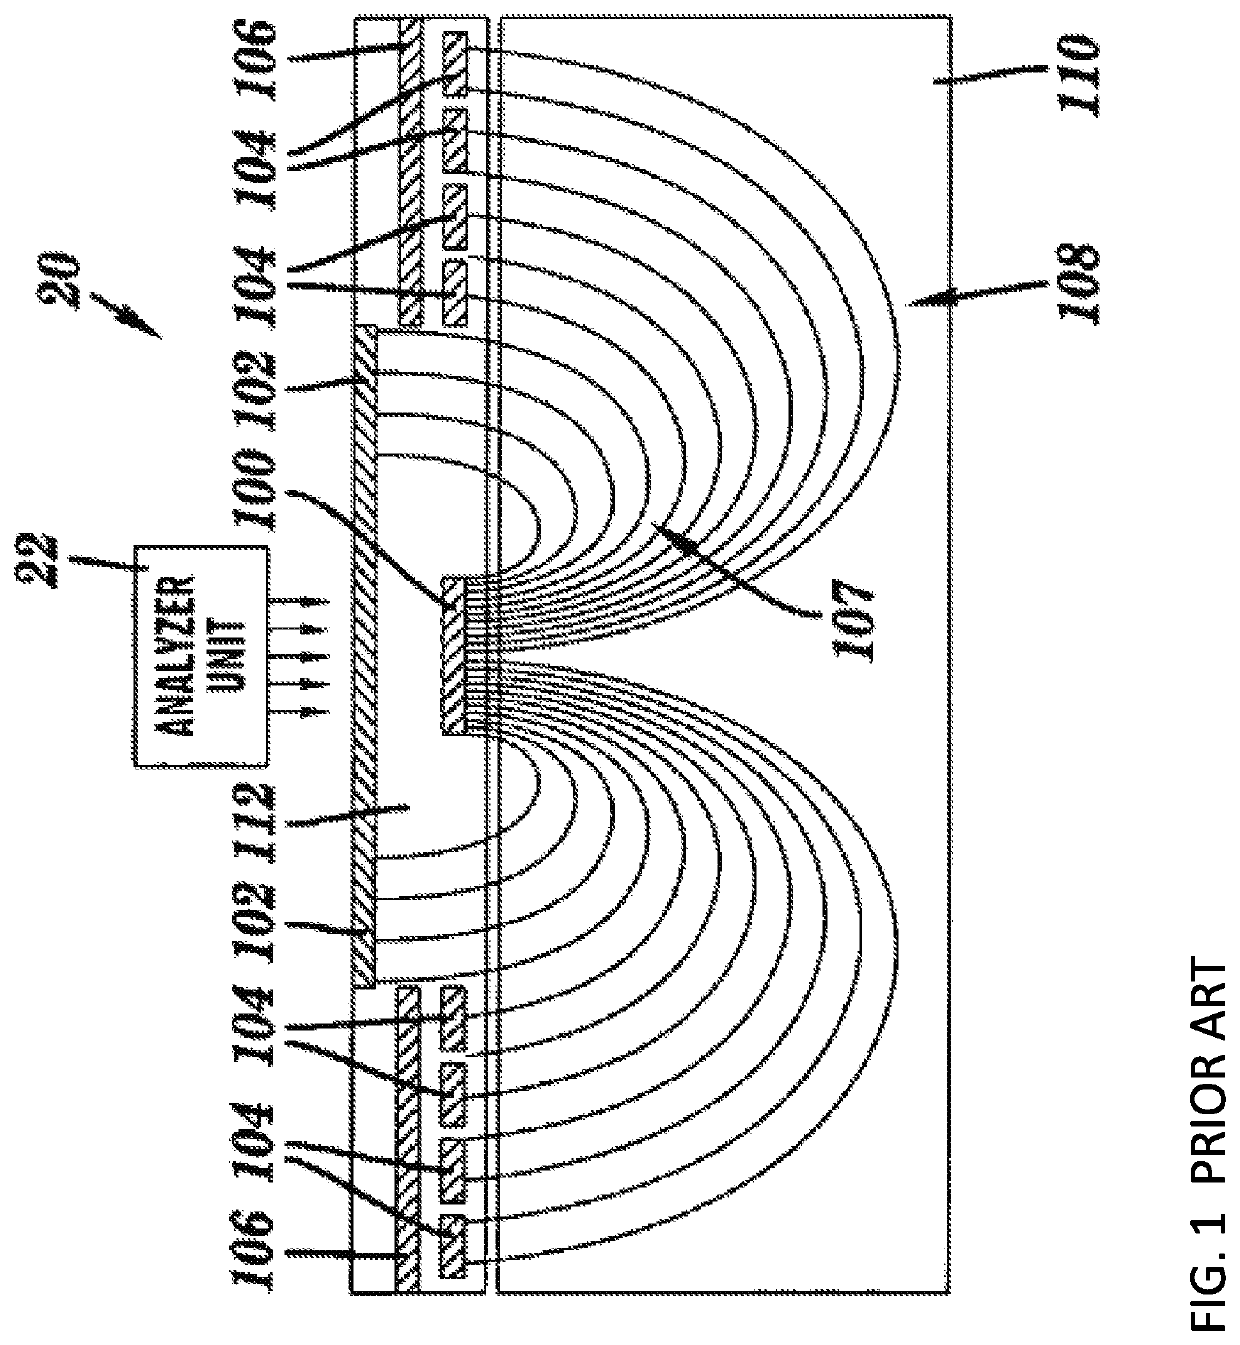 Electromagnetic impedance spectroscopy apparatus and related planar sensor system